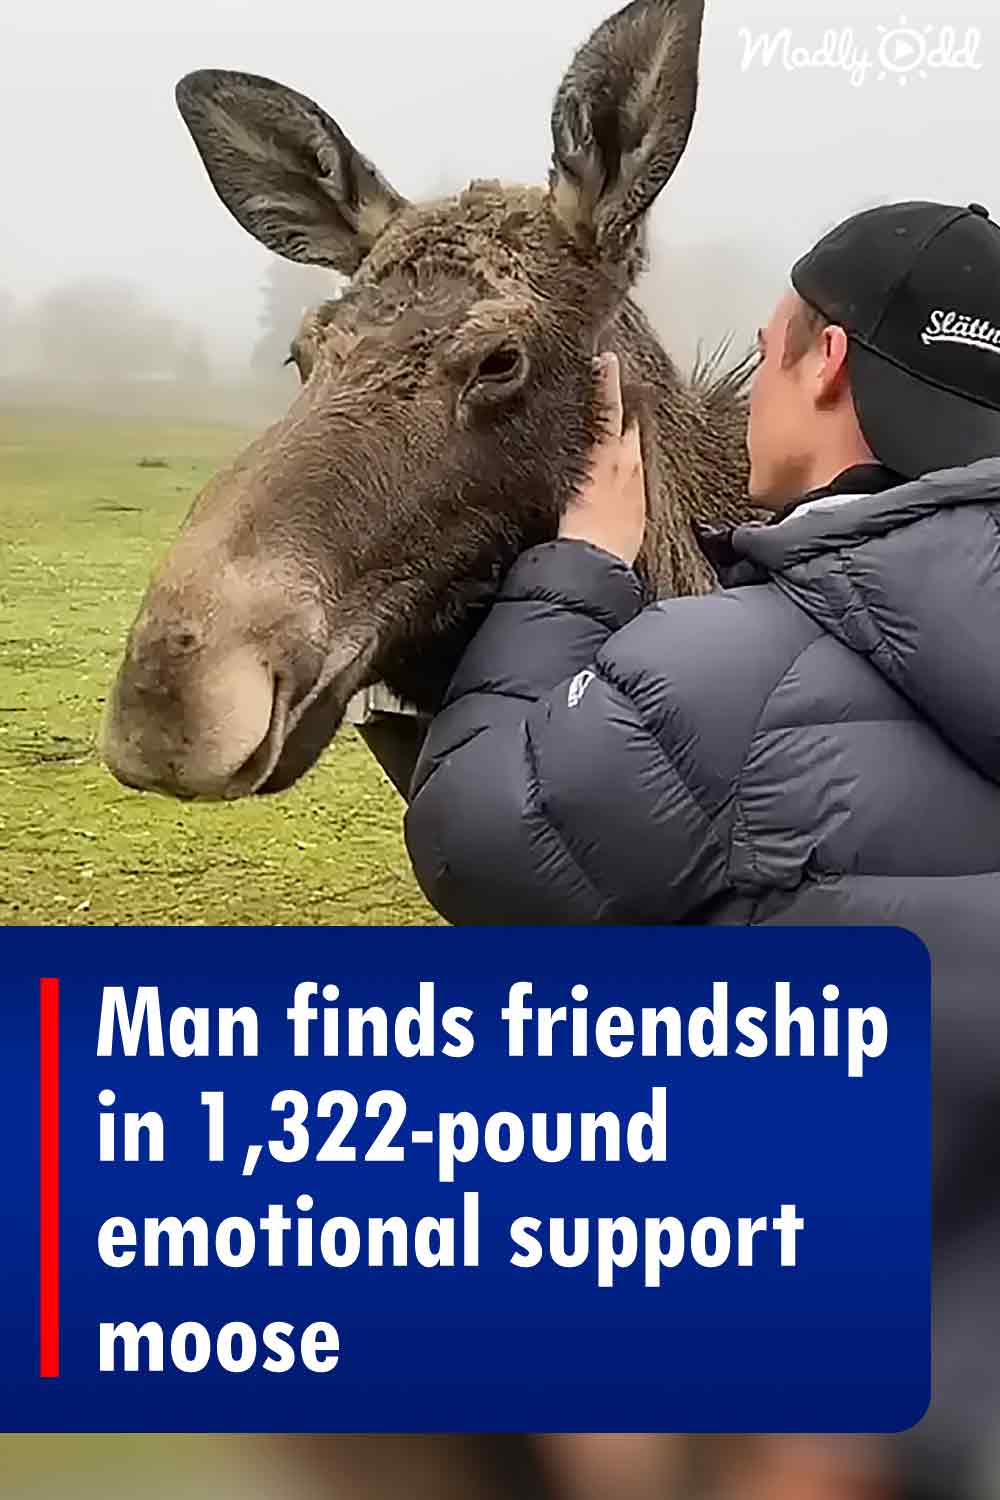 Man finds friendship in 1,322-pound emotional support moose